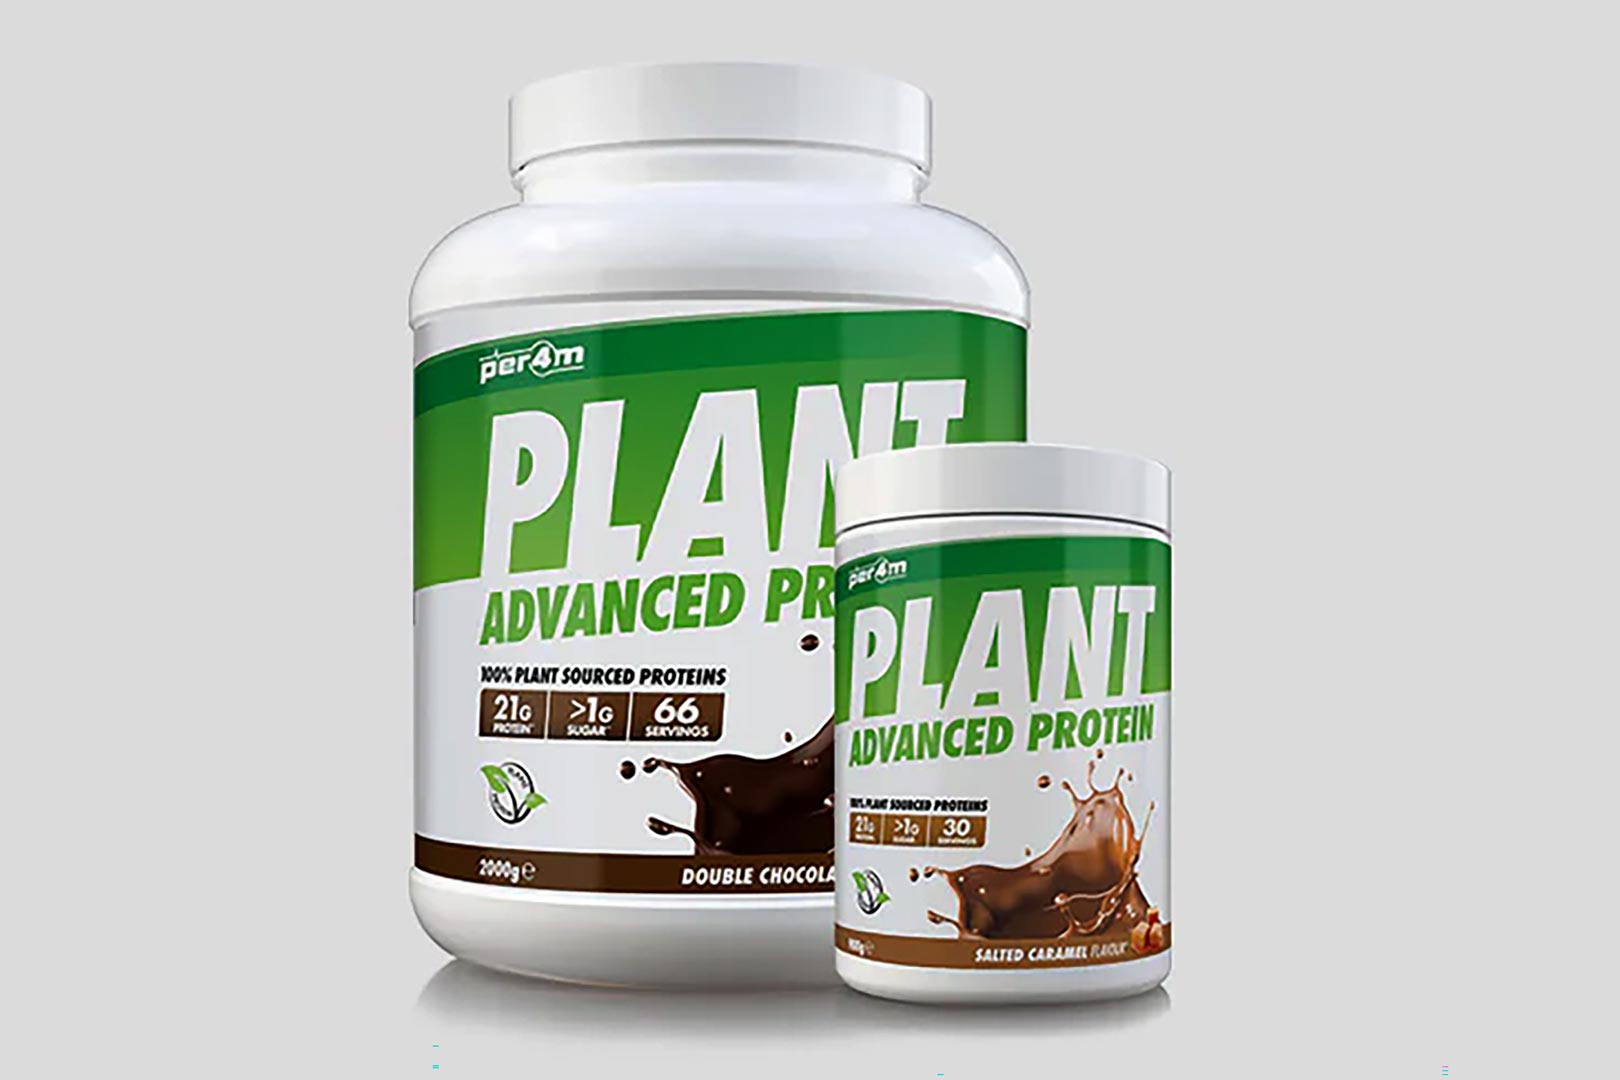 Larger 2kg Tub Of Per4m Plant Protein